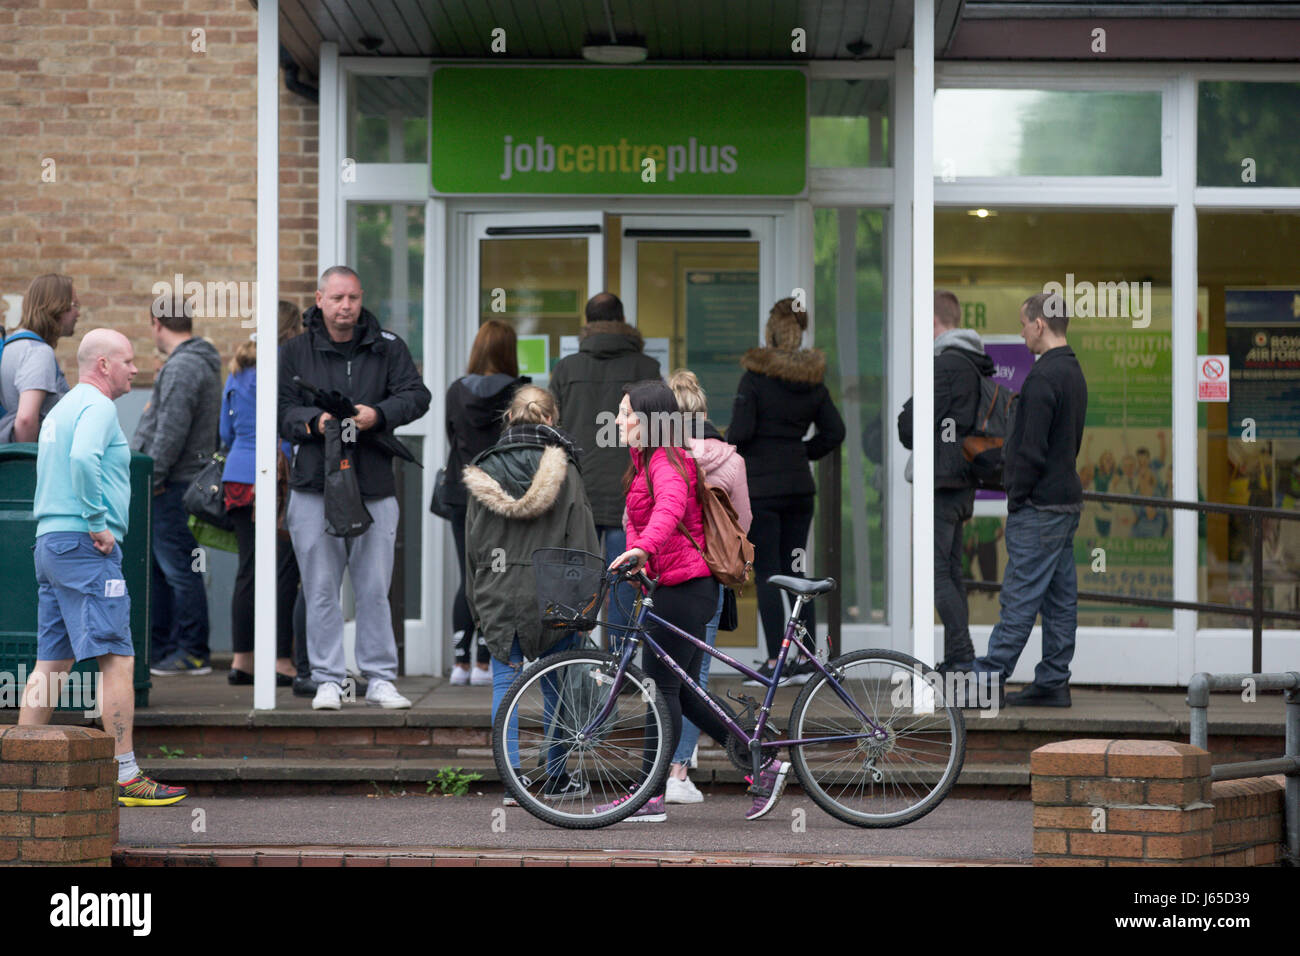 Job Centre in Cambridge on Wednesday May 17th.Today it was announced  the UK unemployment rate has fallen to 4.6%, its lowest in 42 years.   The UK unemployment rate has fallen to 4.6%, its lowest in 42 years, as inflation outstrips wage growth, official figures show. The number of people unemployed fell by 53,000 to 1.54 million in the three months to March, said the Office for National Statistics (ONS). Average weekly earnings excluding bonuses increased by 2.1%. On Tuesday, figures showed inflation hit 2.7% in April, up from 2.3%, its highest since September 2013. The jobless rate has not b Stock Photo